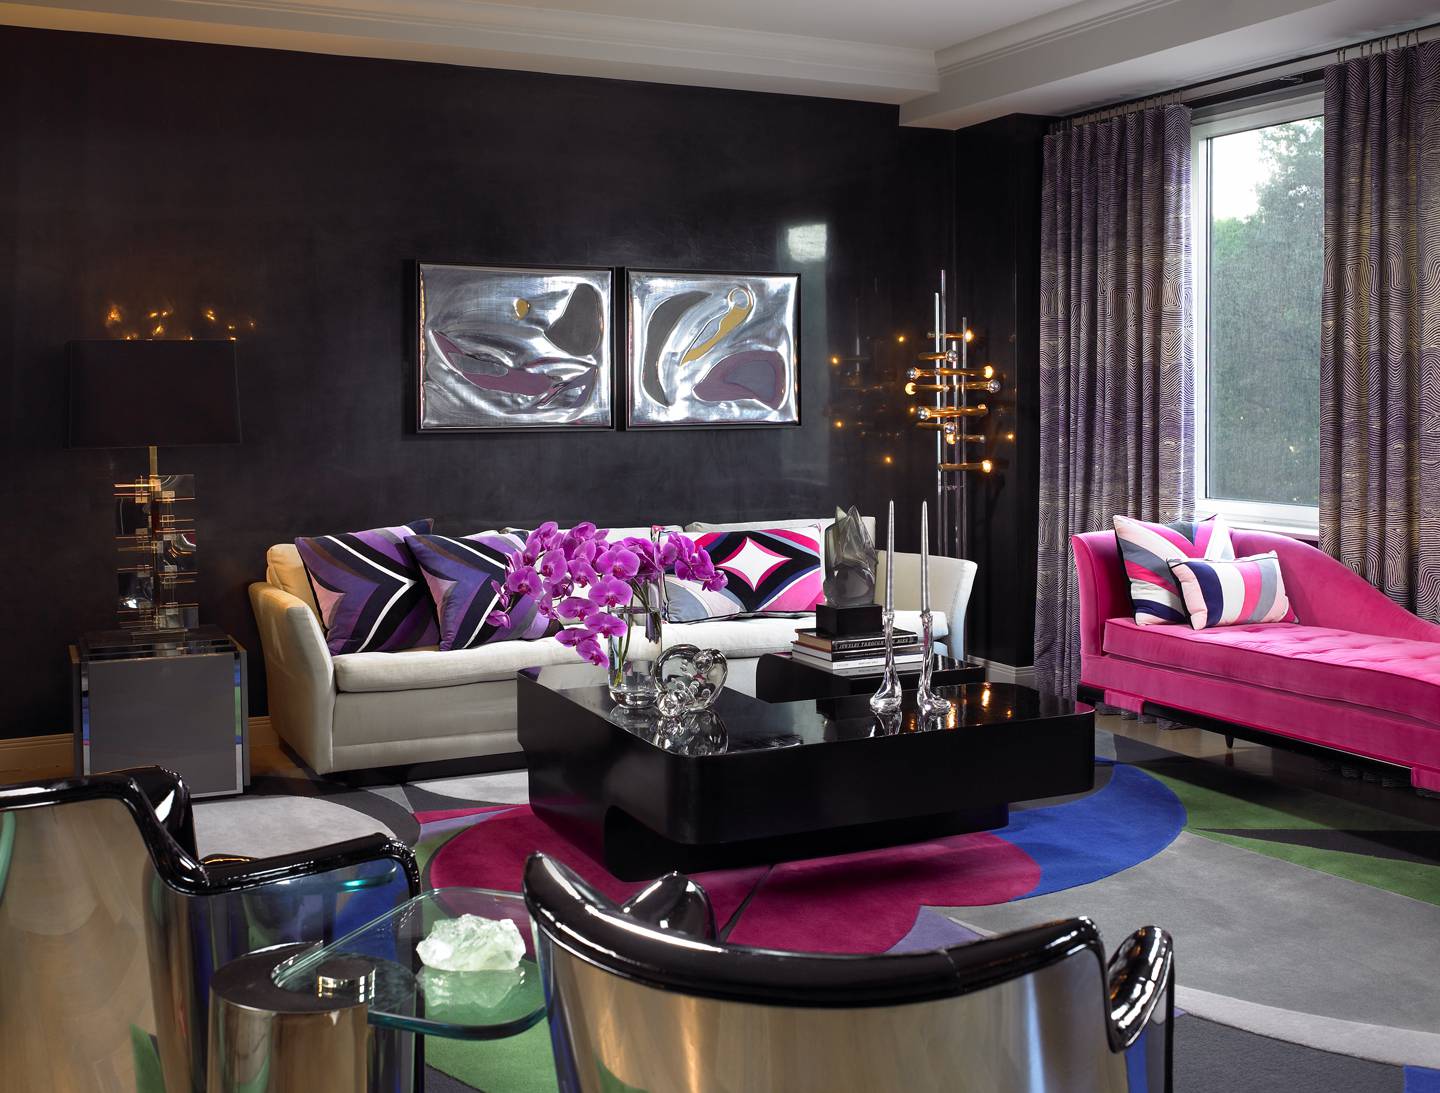 Amy Lau - Discover Her Wonderful Interior Design Projects